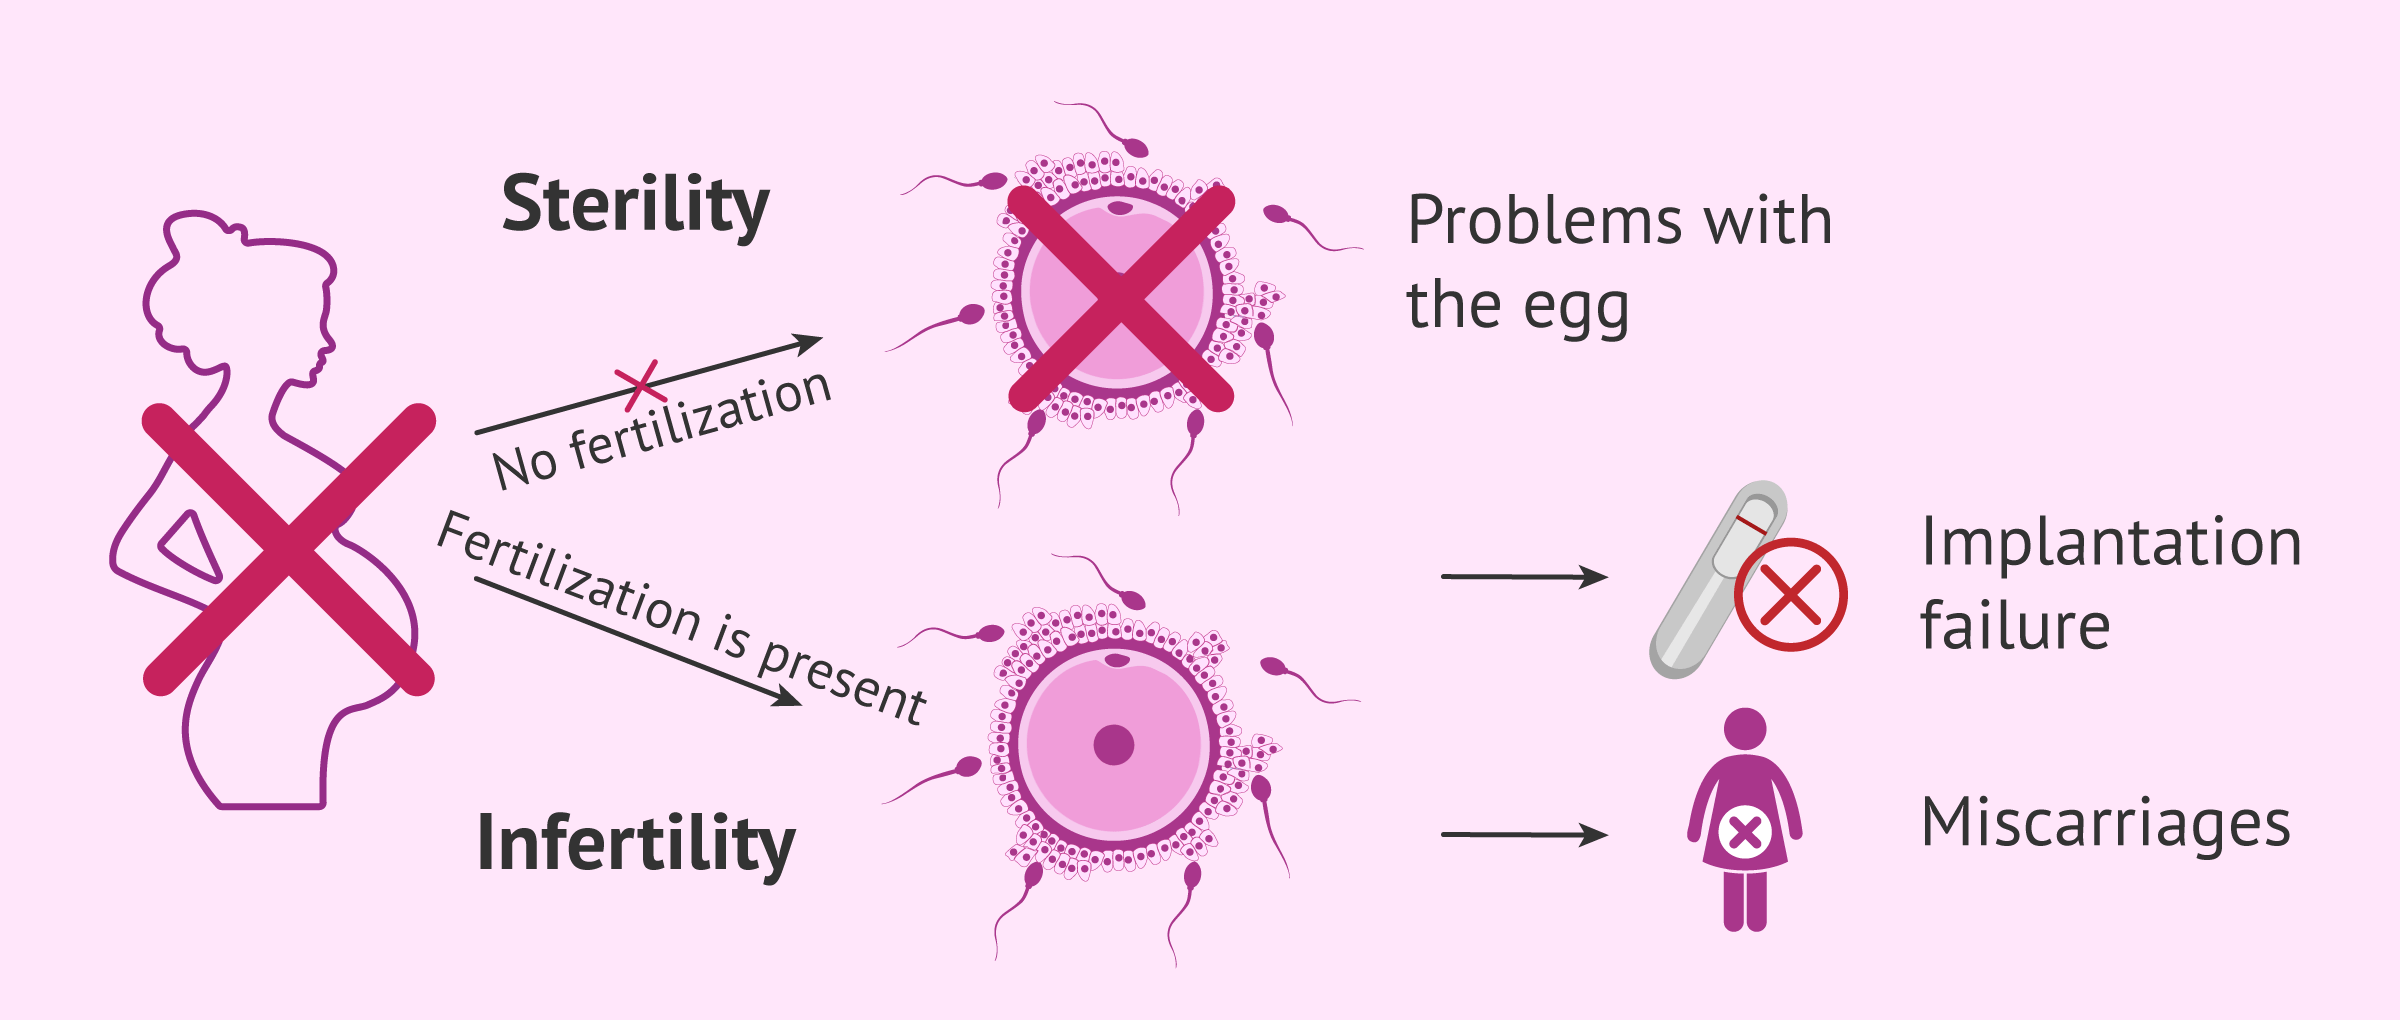 Differences between infertility and sterility in women